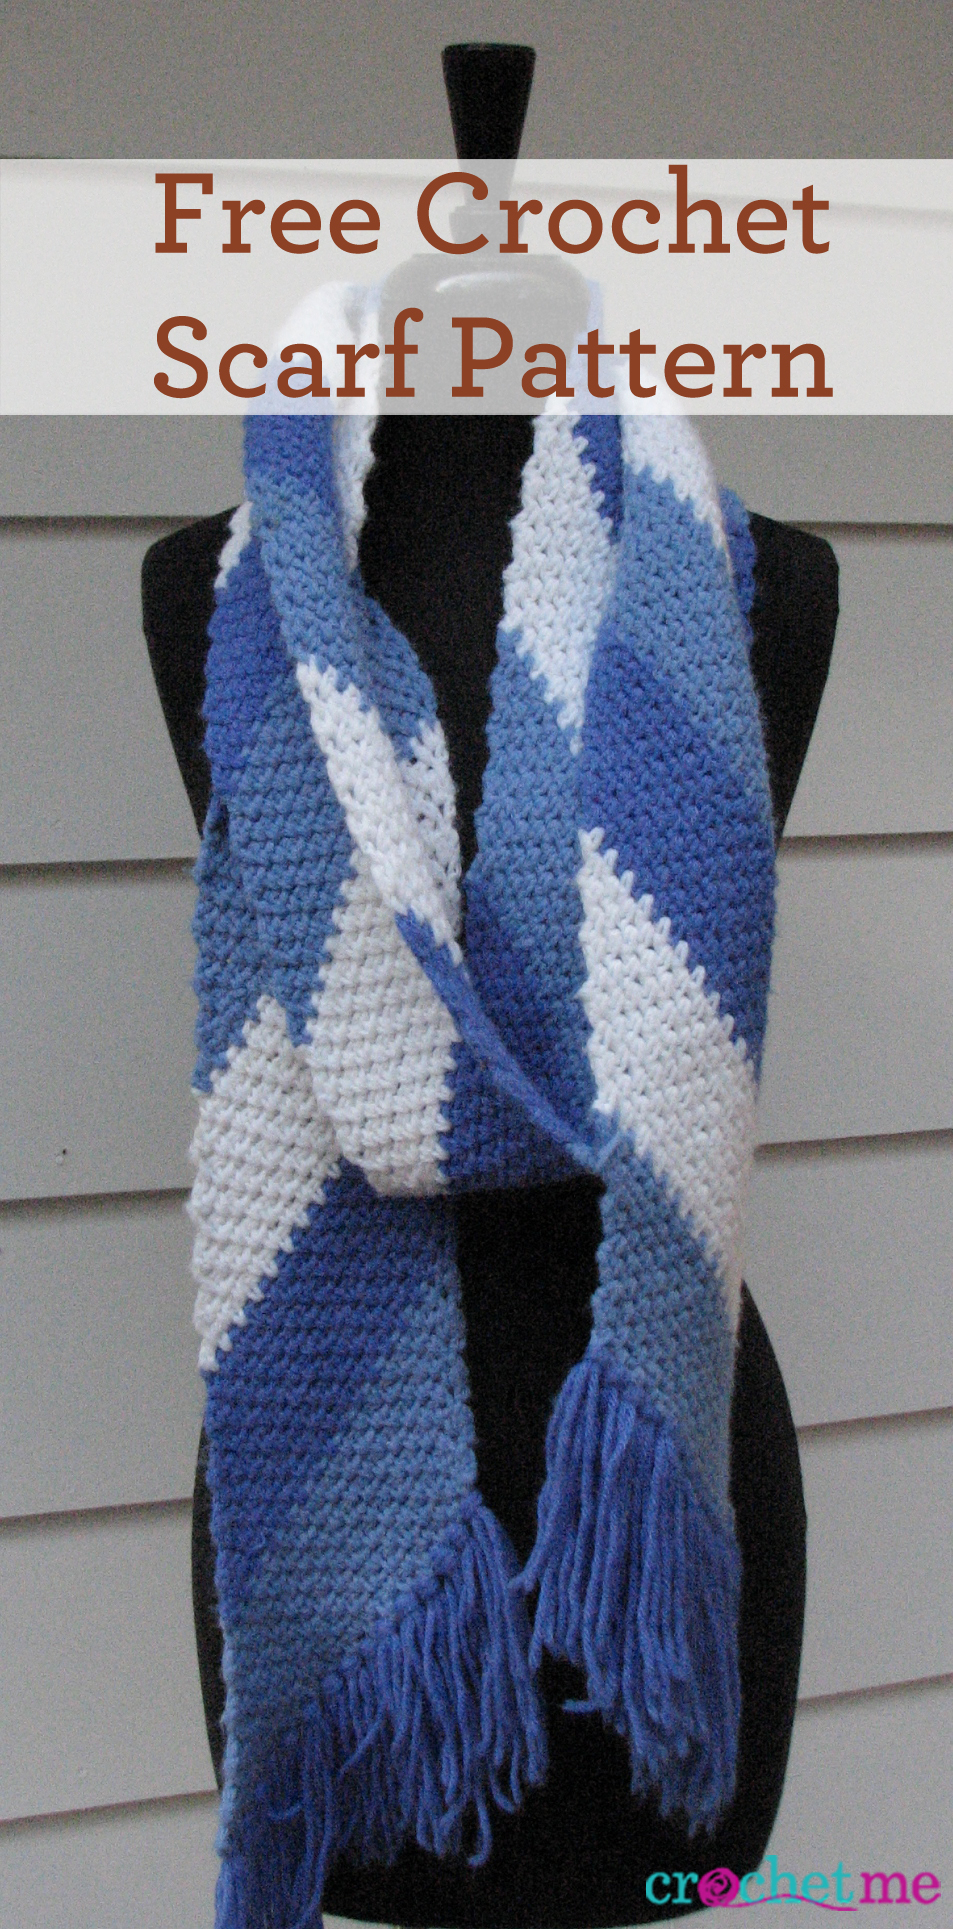 Simple Scarf Knitting Patterns For Beginners Free Crochet Simple Striped Scarf Pattern Interweave